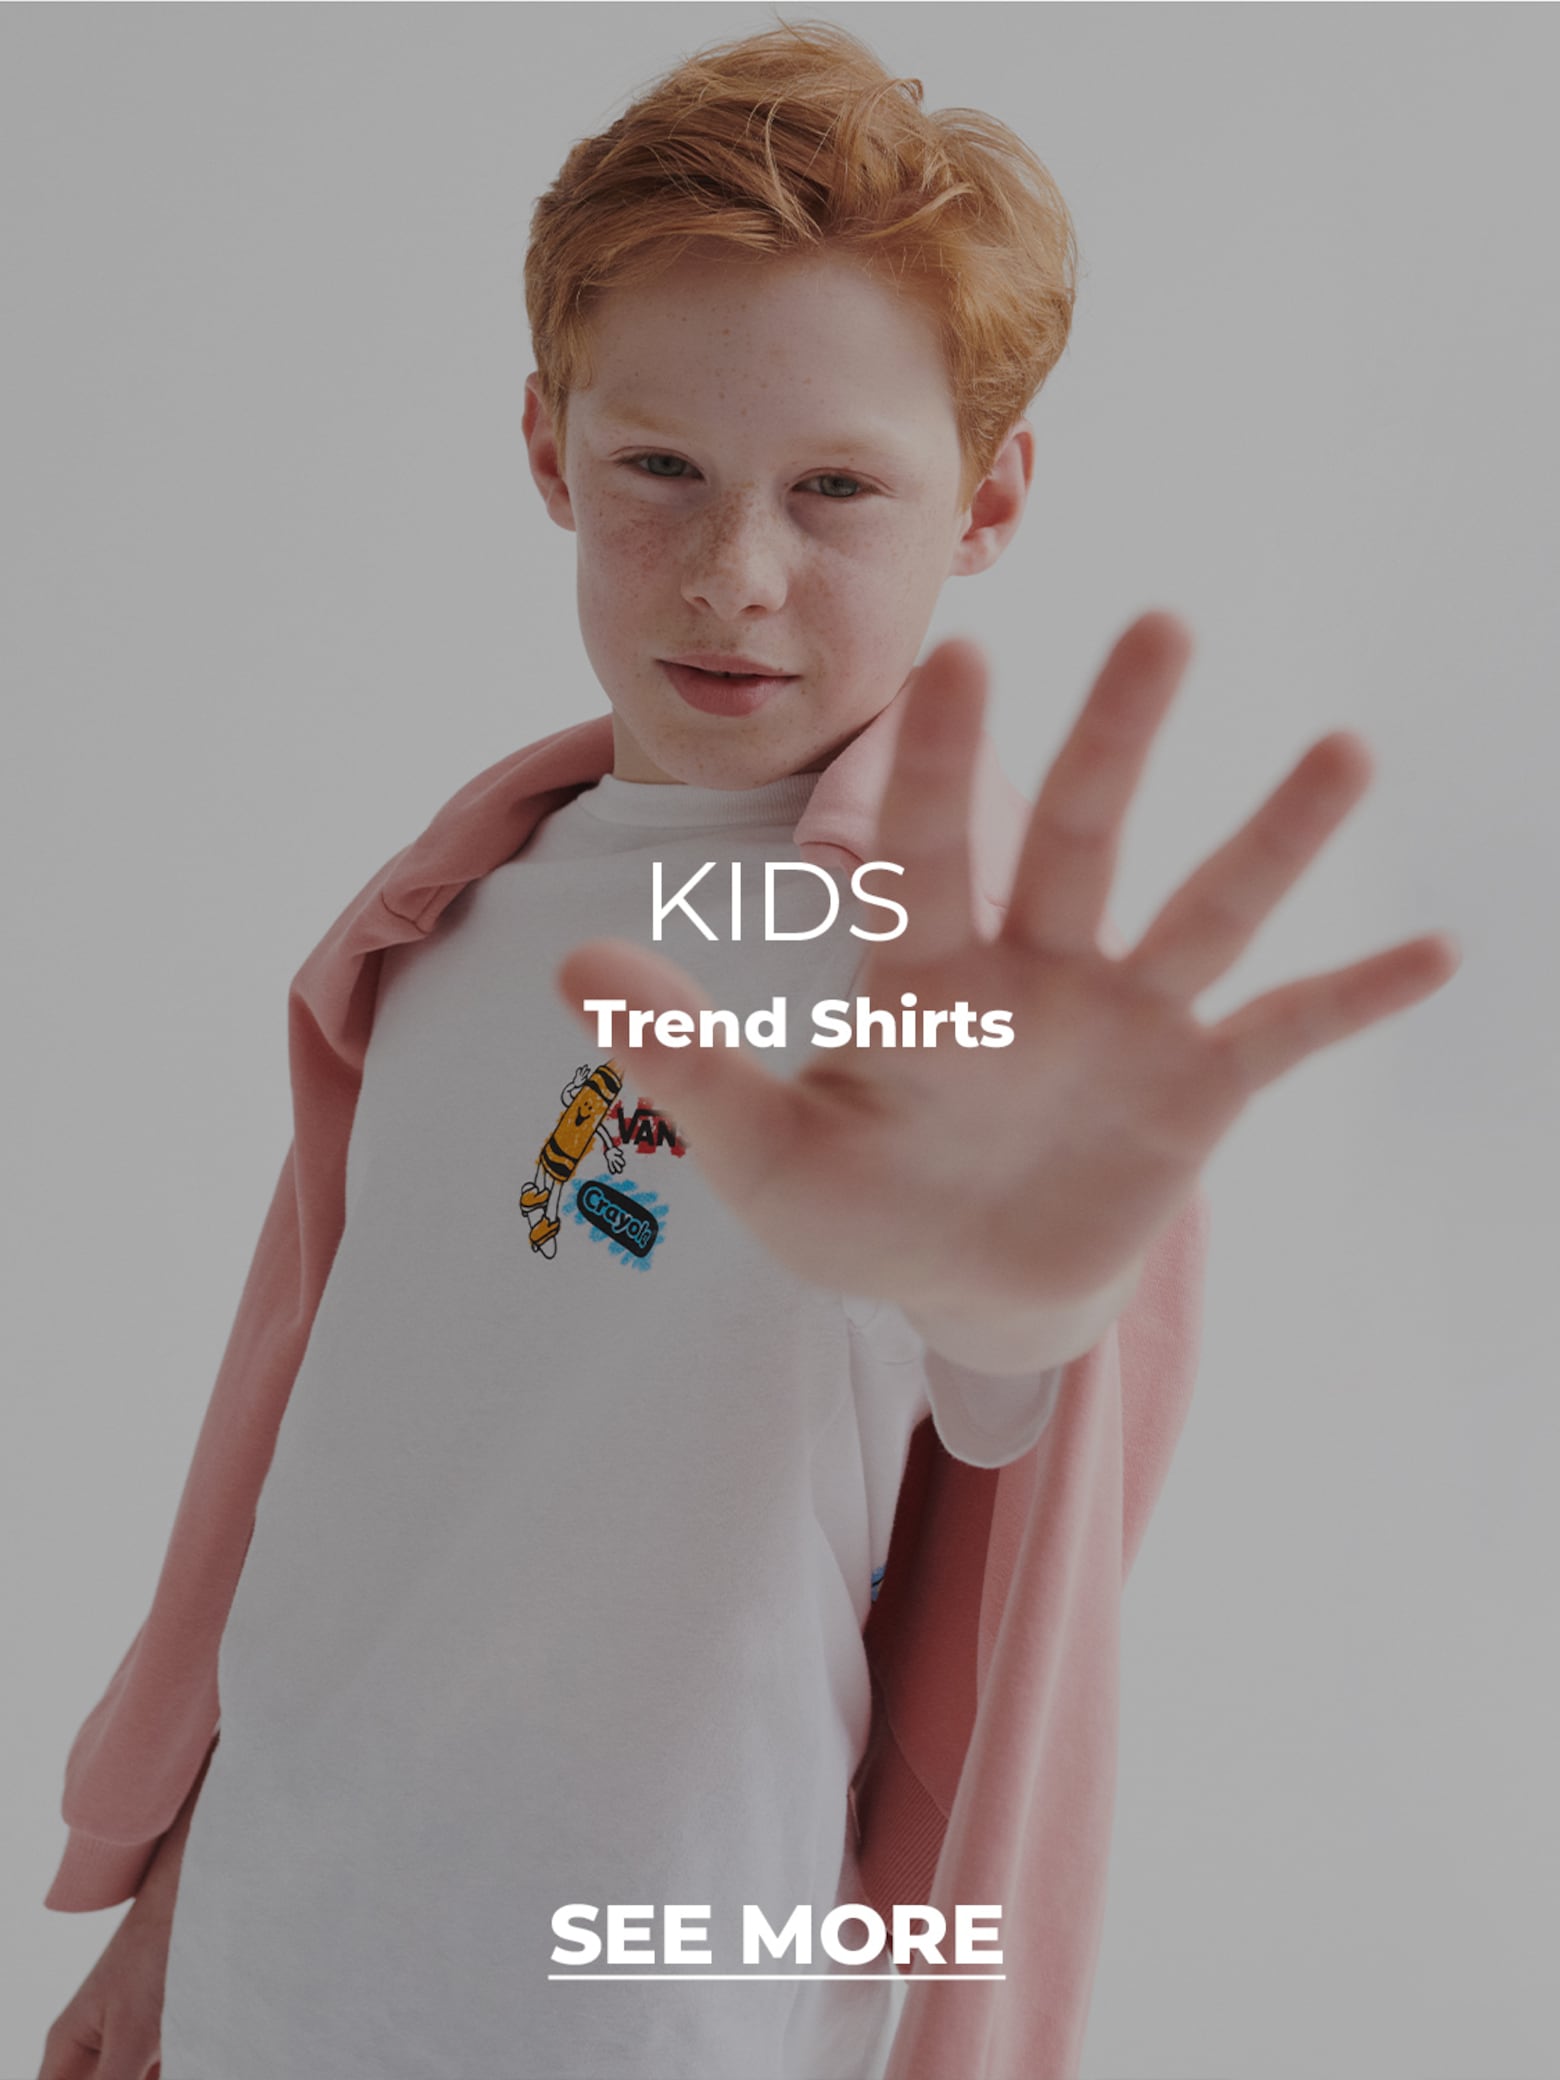 For boys The coolest trends